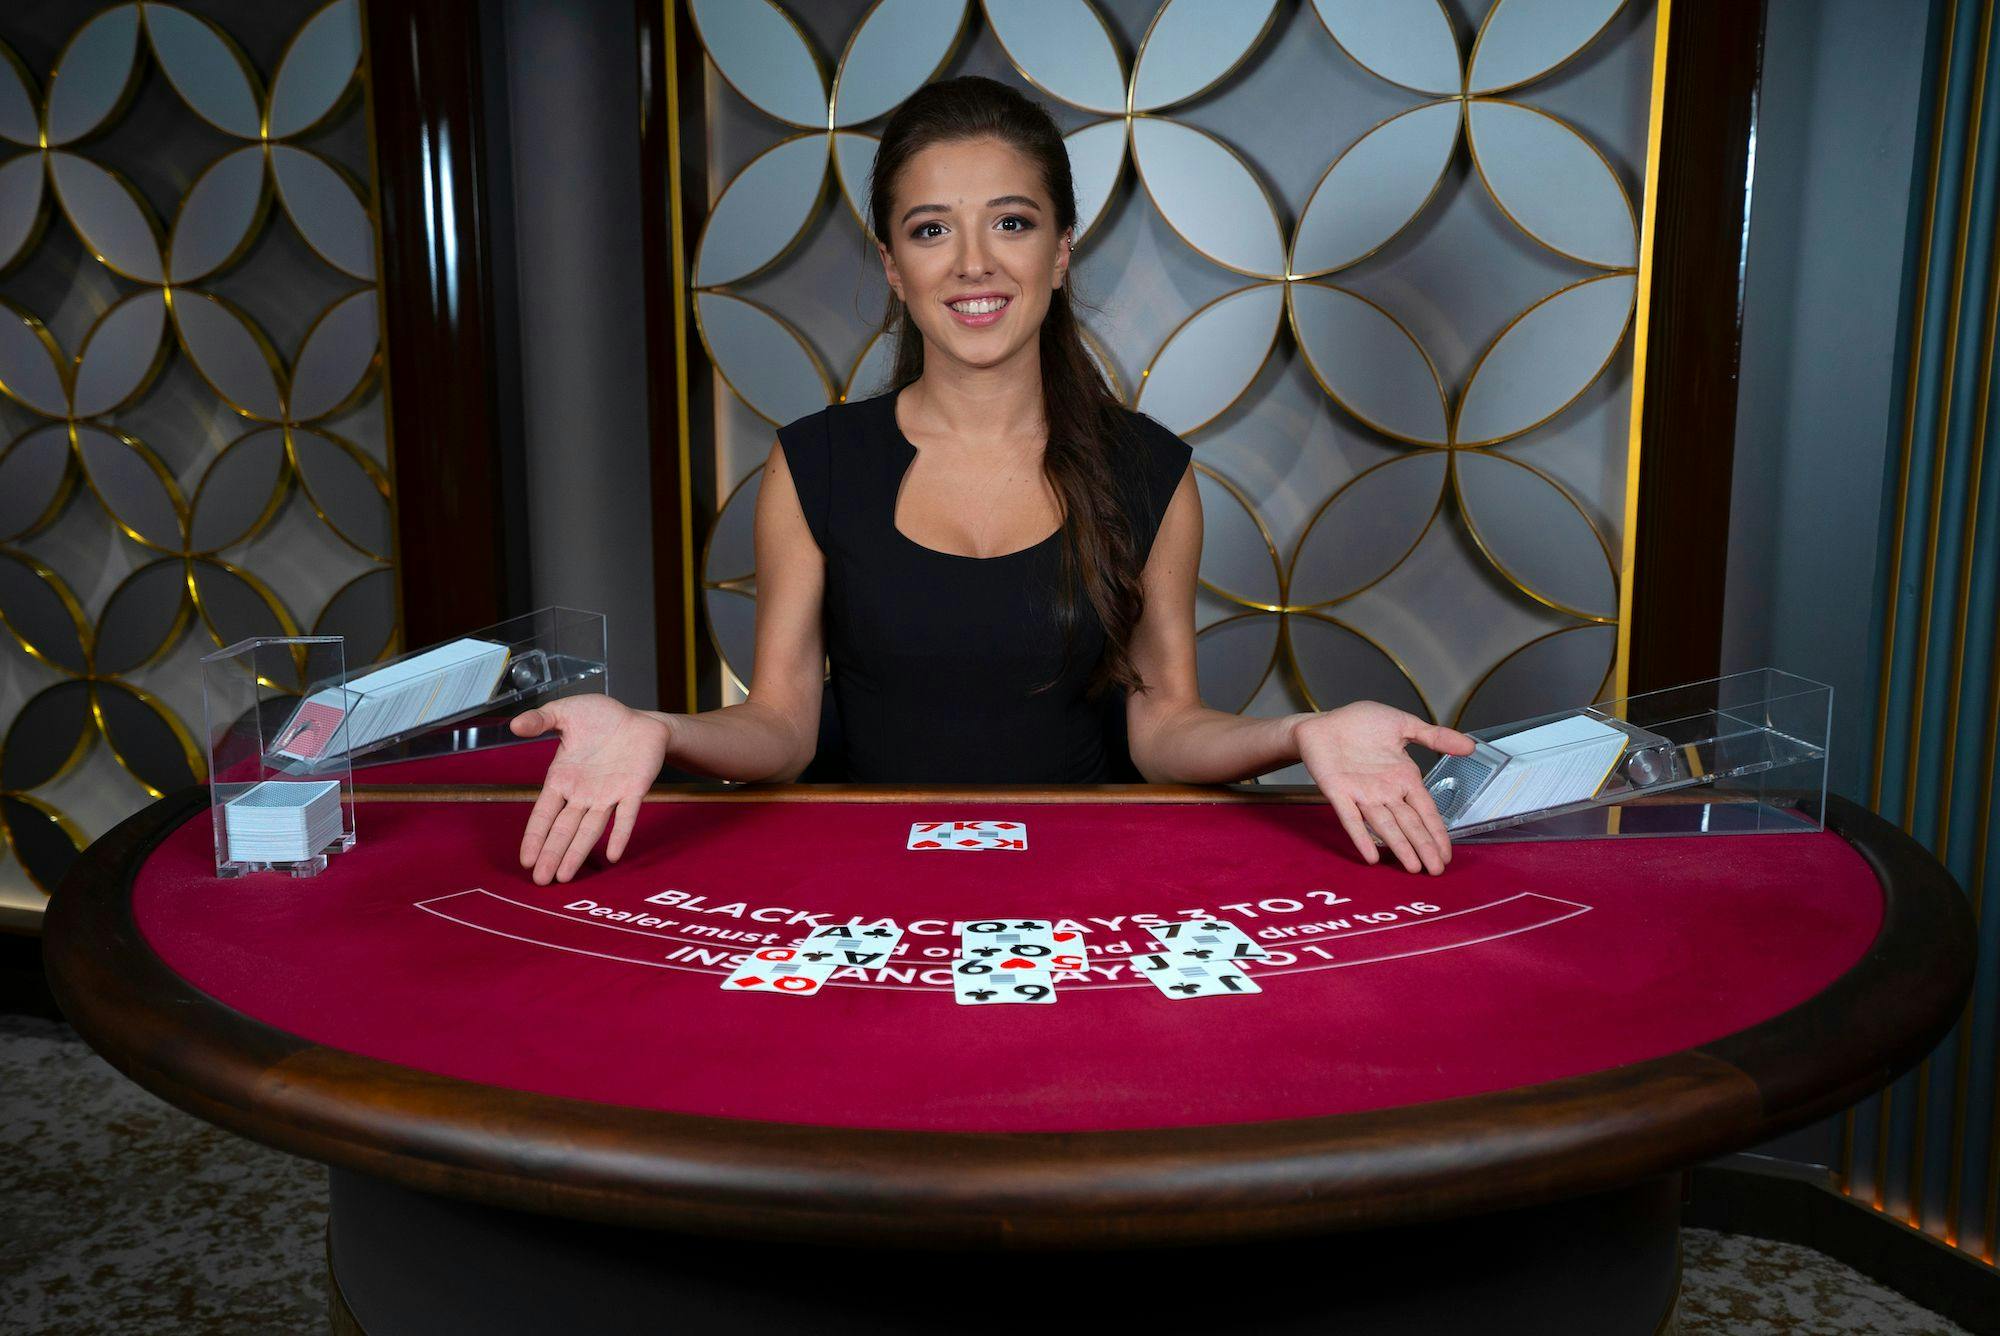 Unleash Your Luck: Best Blackjack and Roulette Games Online with